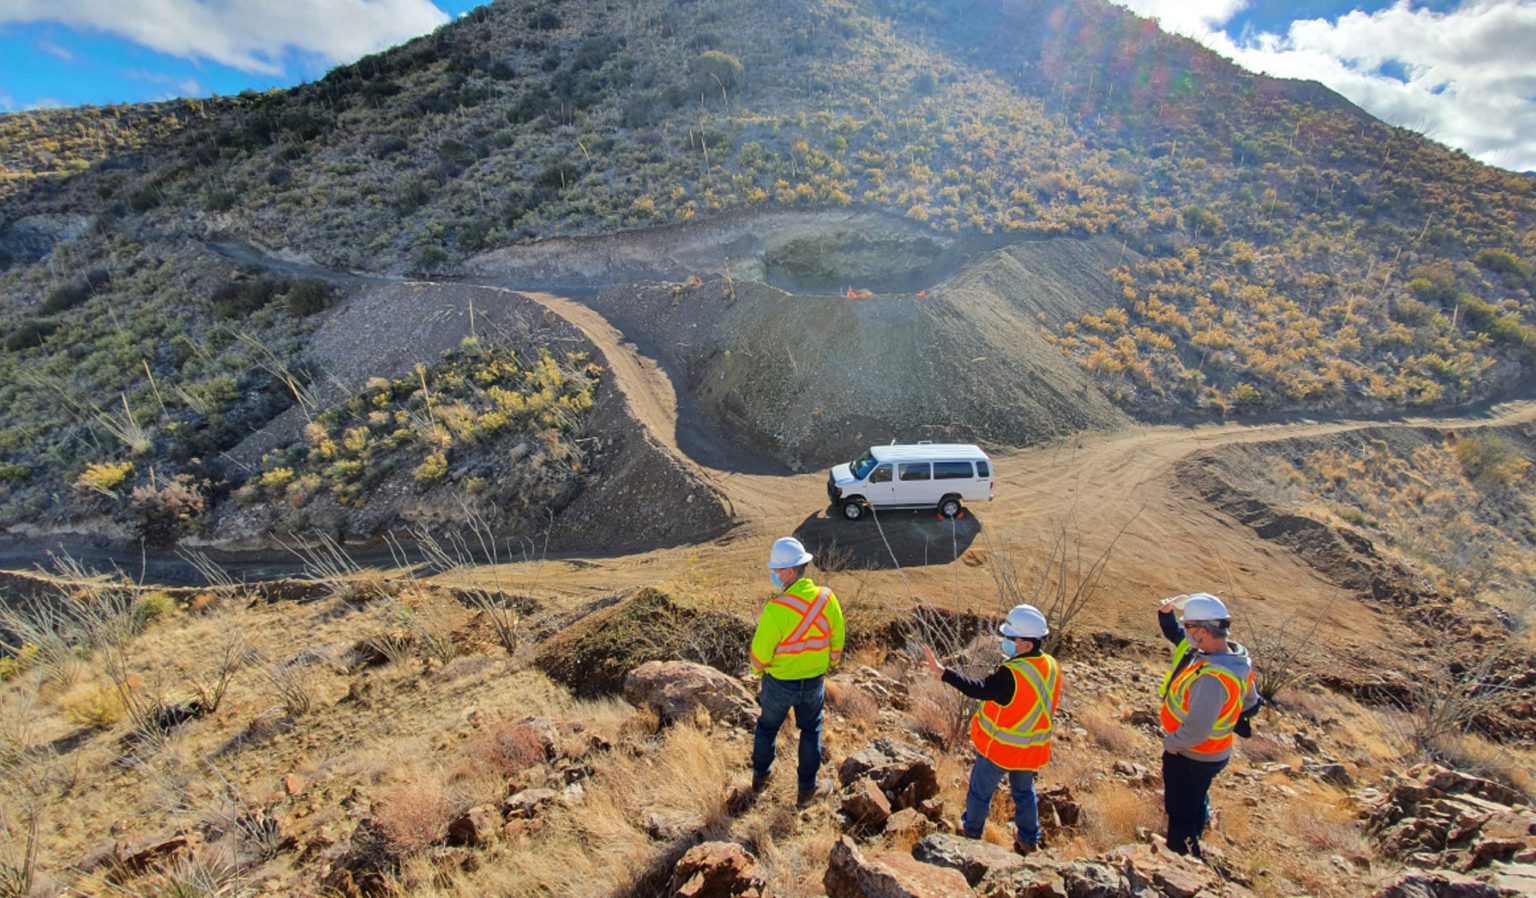 Hudbay Minerals needs $1.9bn for Copper World project in Arizona